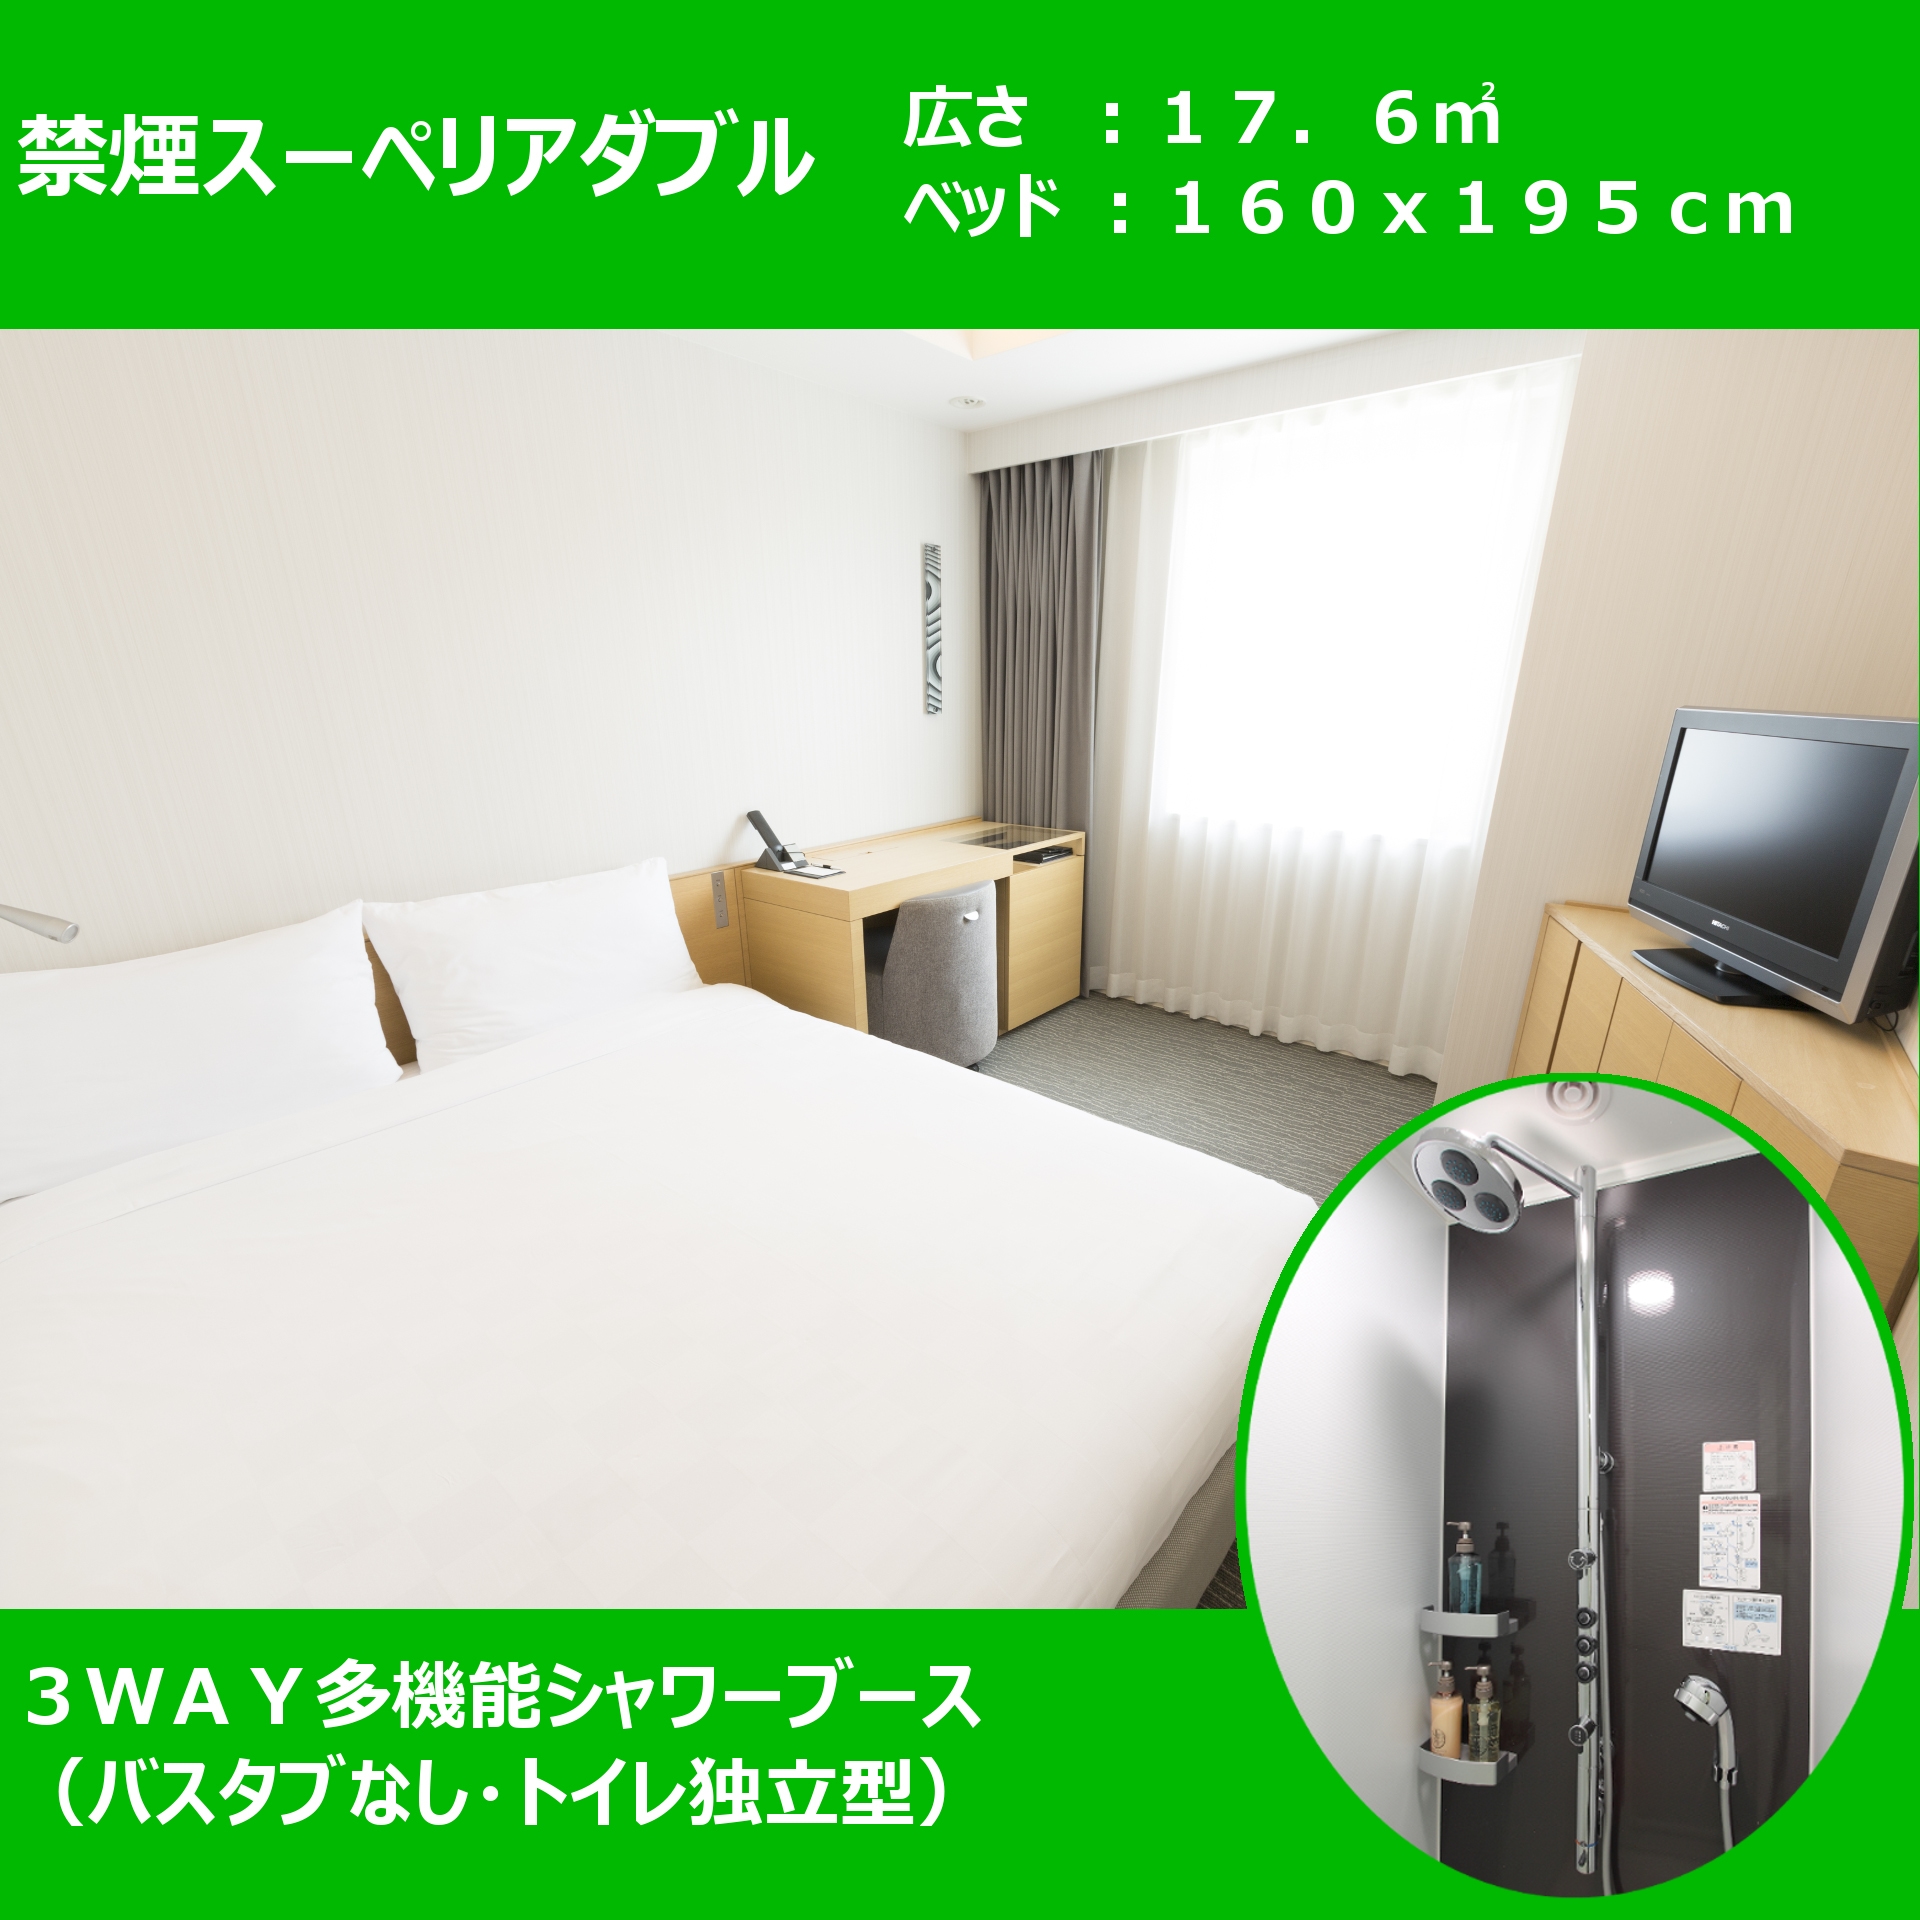 Non-smoking superior double ■ 11th floor and above ■ 17.6 square meters, 160cm Q bed ■ Multi-functional shower (without bathtub)